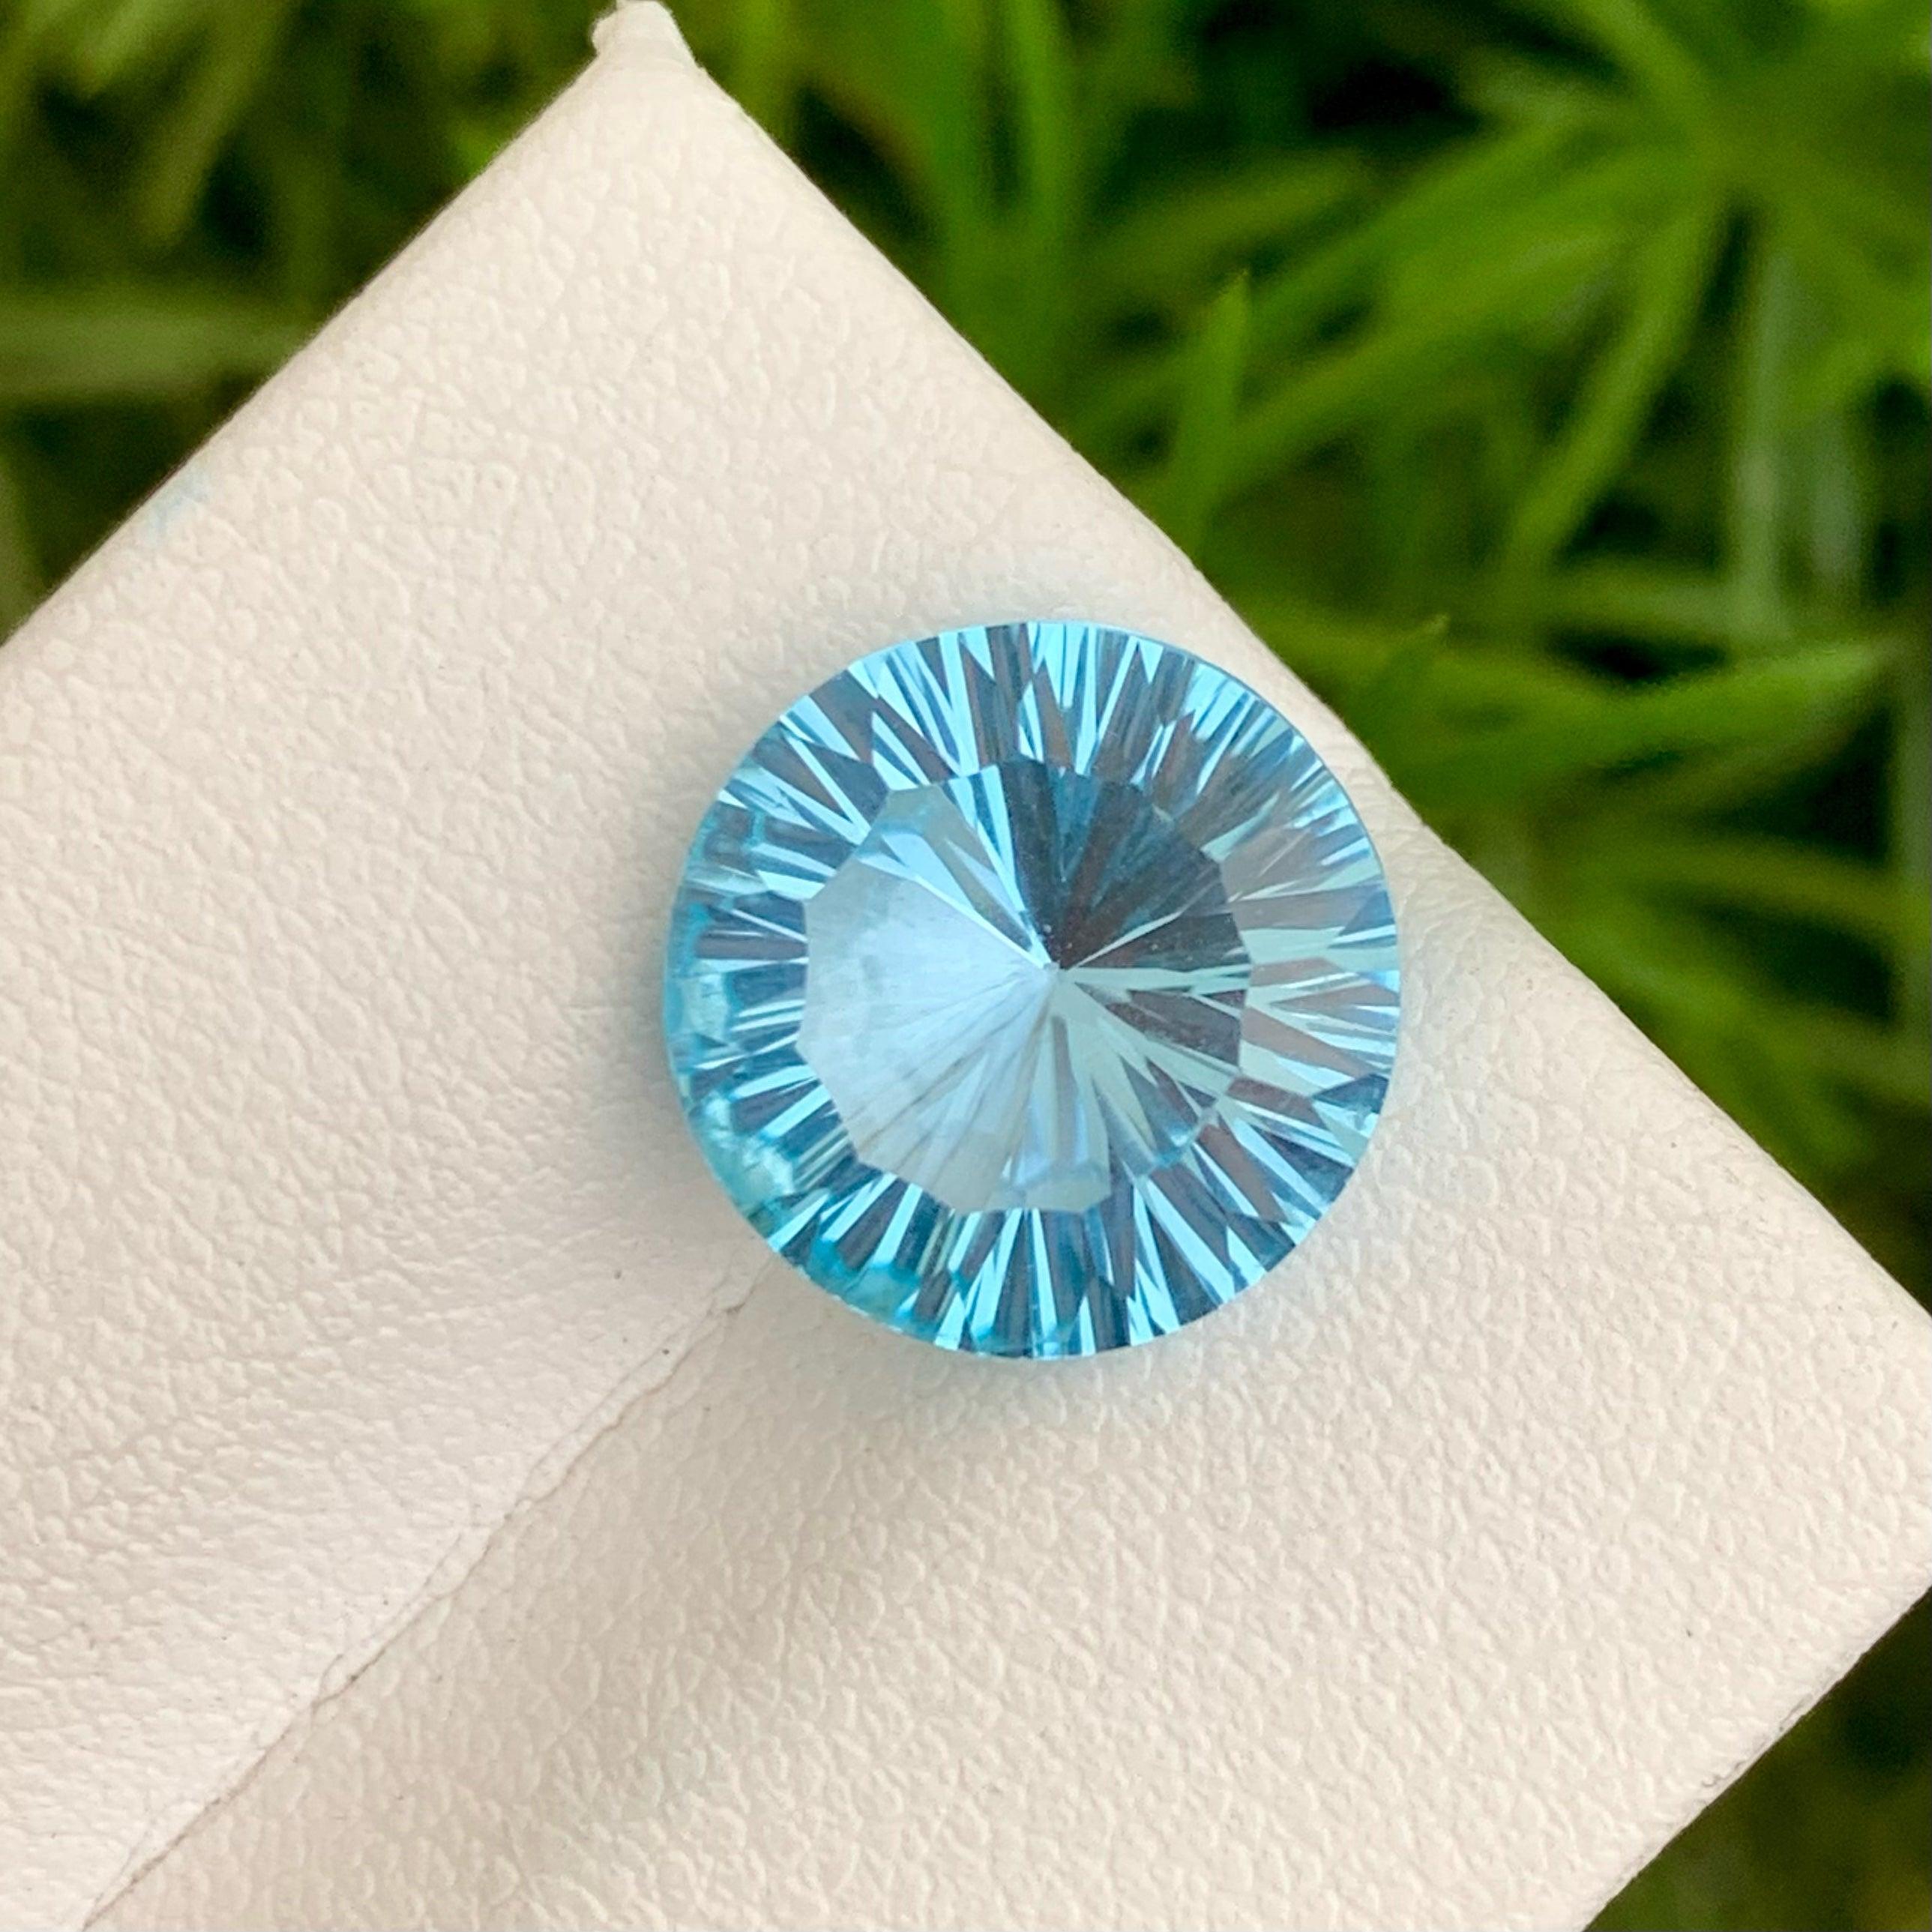 Lovely Natural Carved Swiss Blue Topaz Stone, available For Sale At Wholesale Price Natural High Quality 6.55 Carats eye clean Clarity Natural Loose Topaz From Madagascar. 

Product Information:
GEMSTONE NAME: Lovely Natural Carved Swiss Blue Topaz